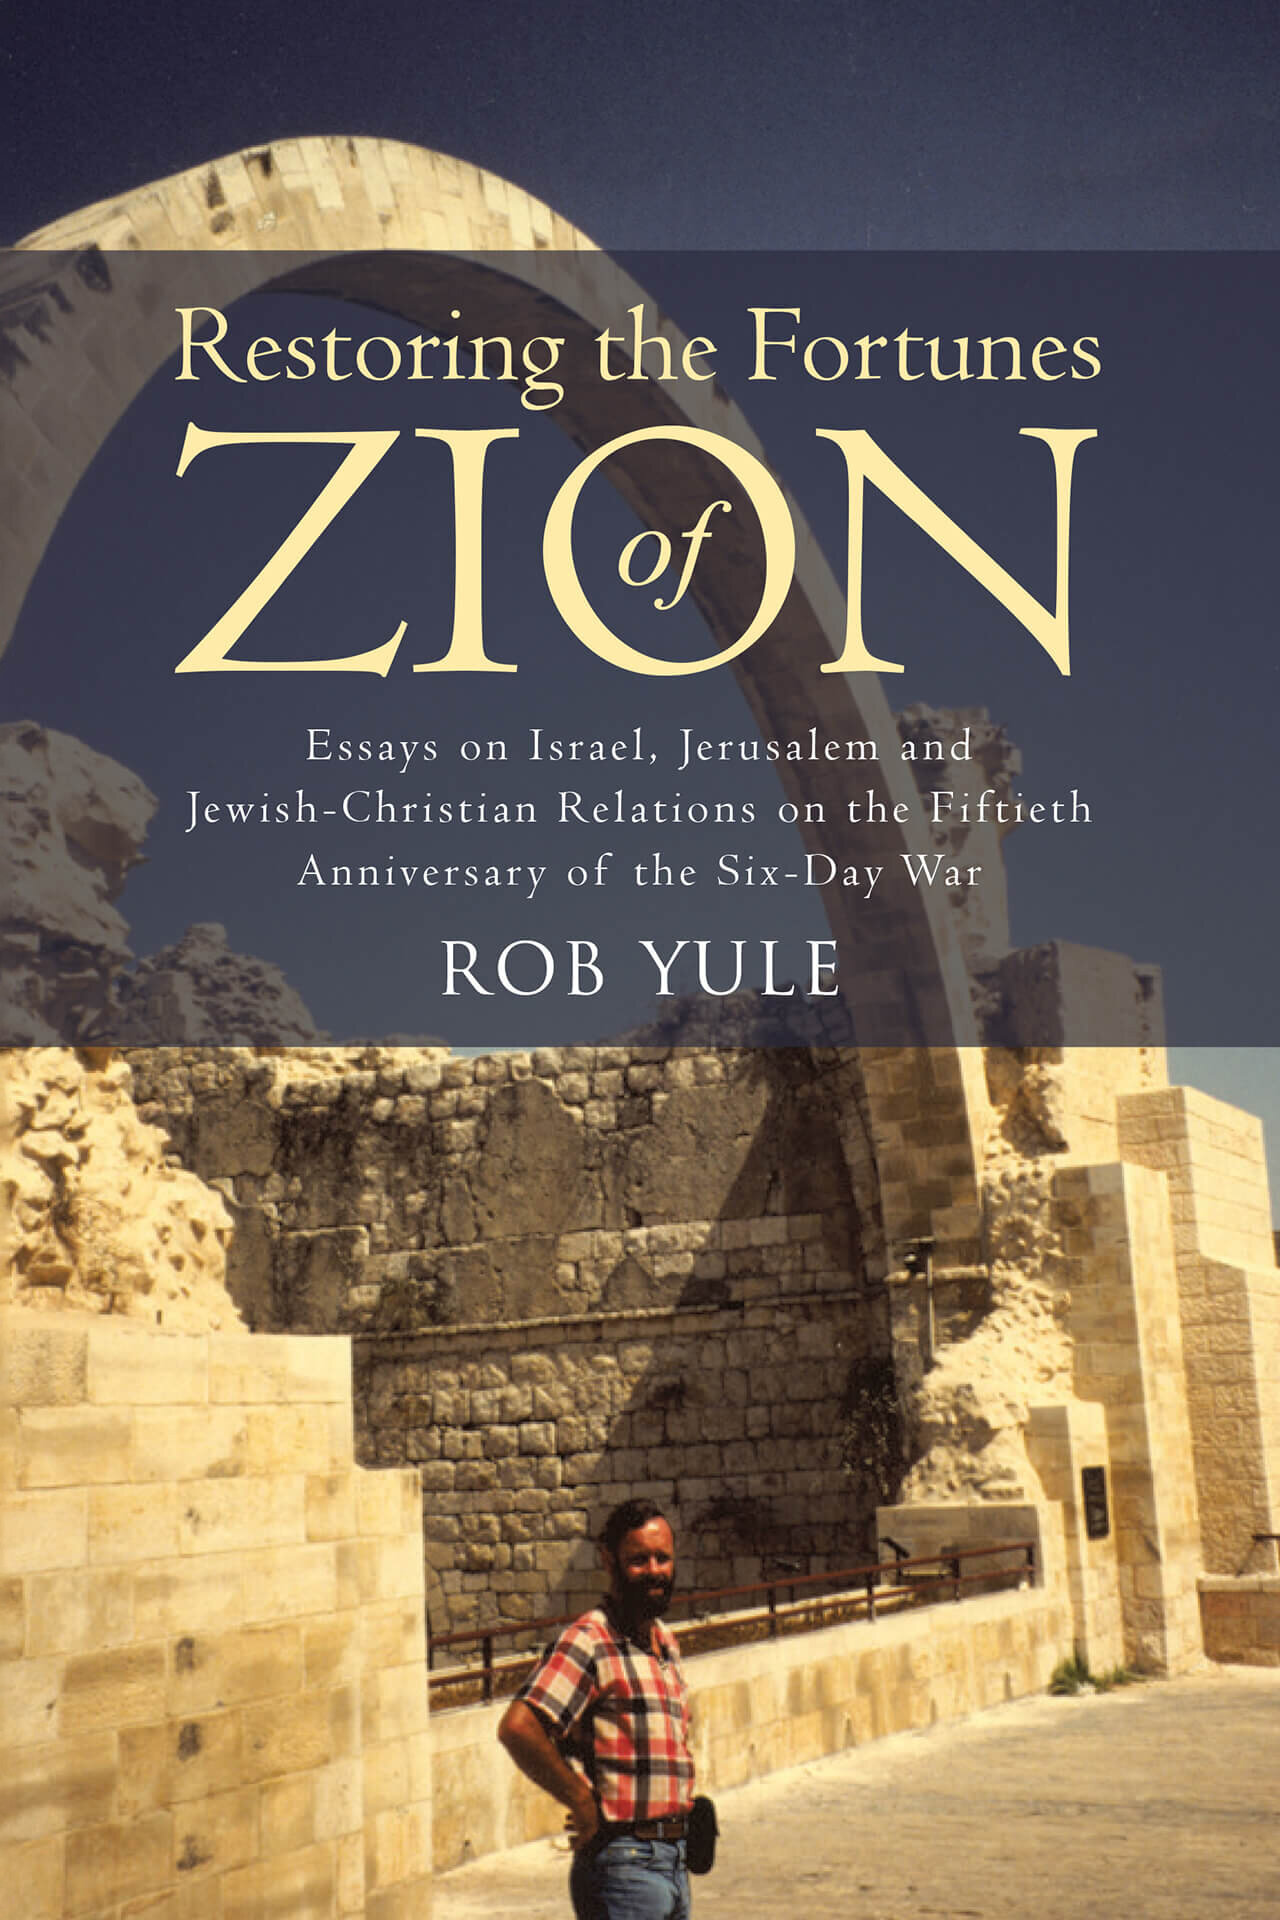 Restoring-the-Fortunes-of-Zion-Rob-Yule-front-cover-Israel-Westbow-Wild-Side-Publishing-Christian-Books-New-Zealand-NZ.jpg